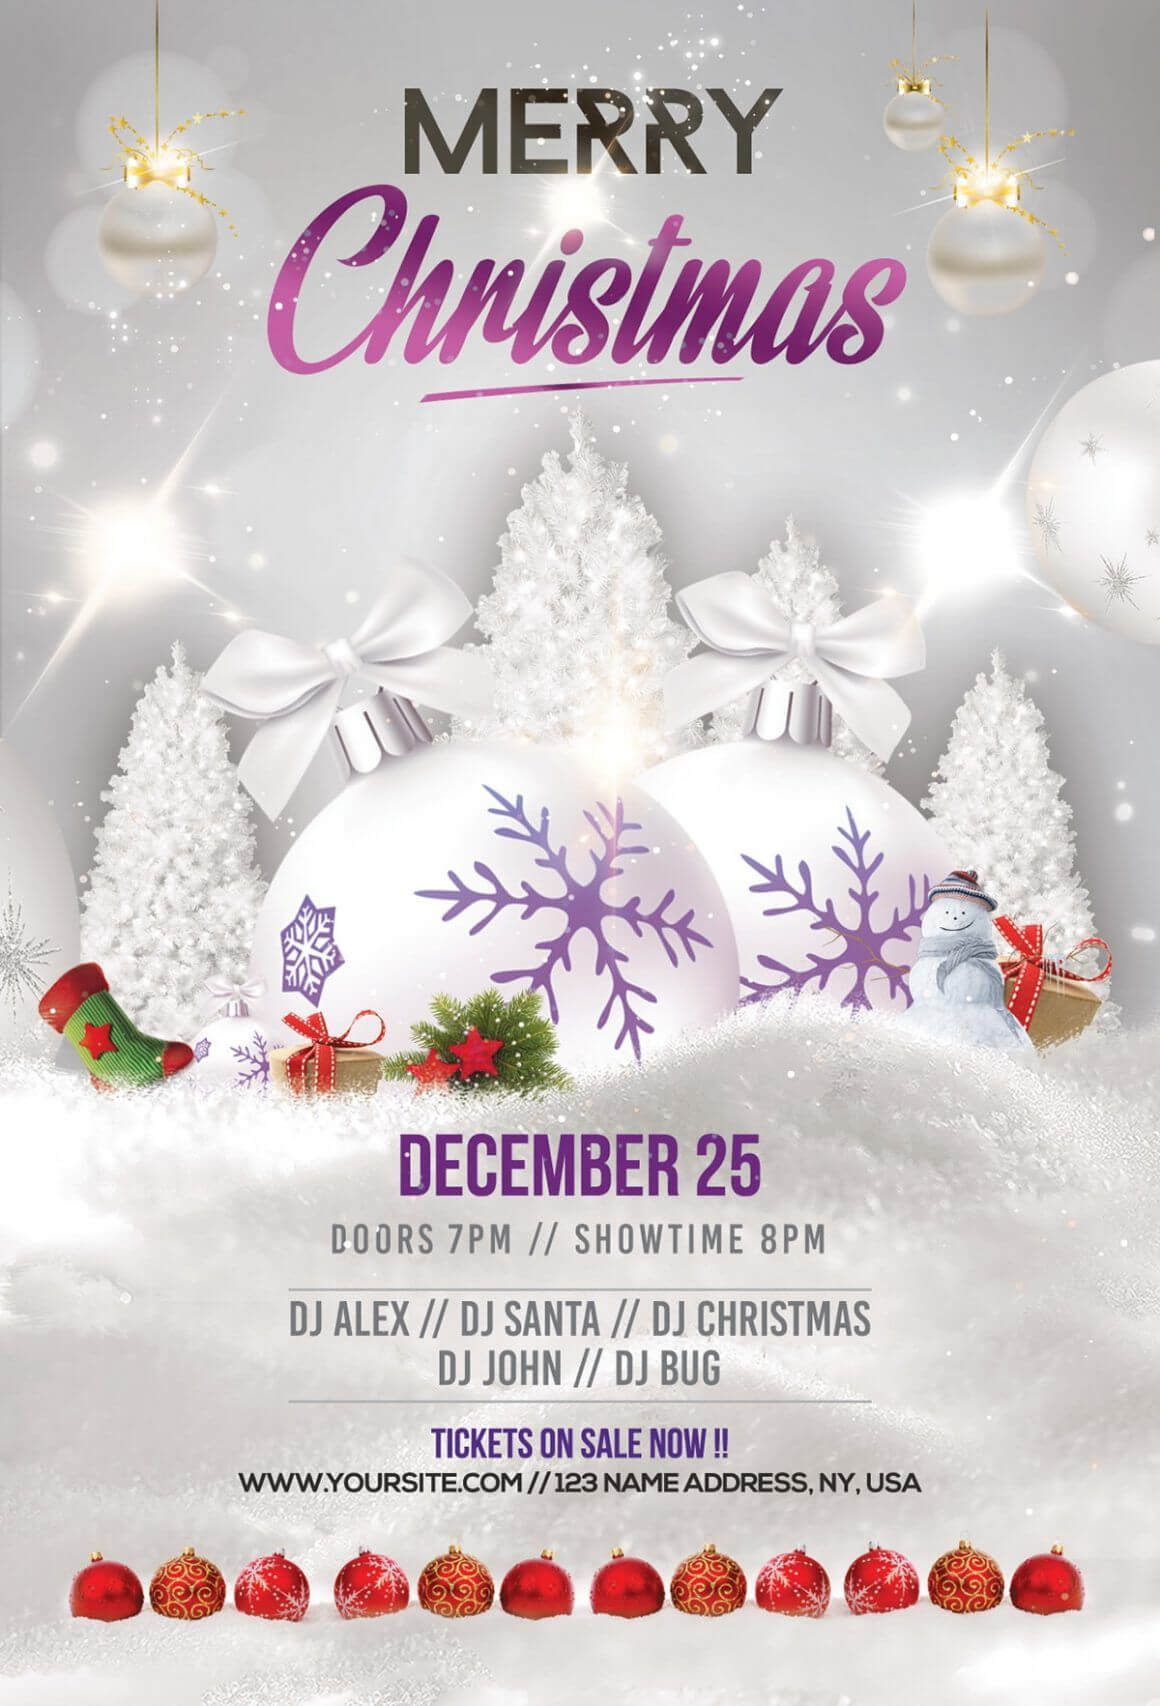 Merry Christmas & Holiday Free Psd Flyer Template | Free Psd Pertaining To Christmas Brochure Templates Free